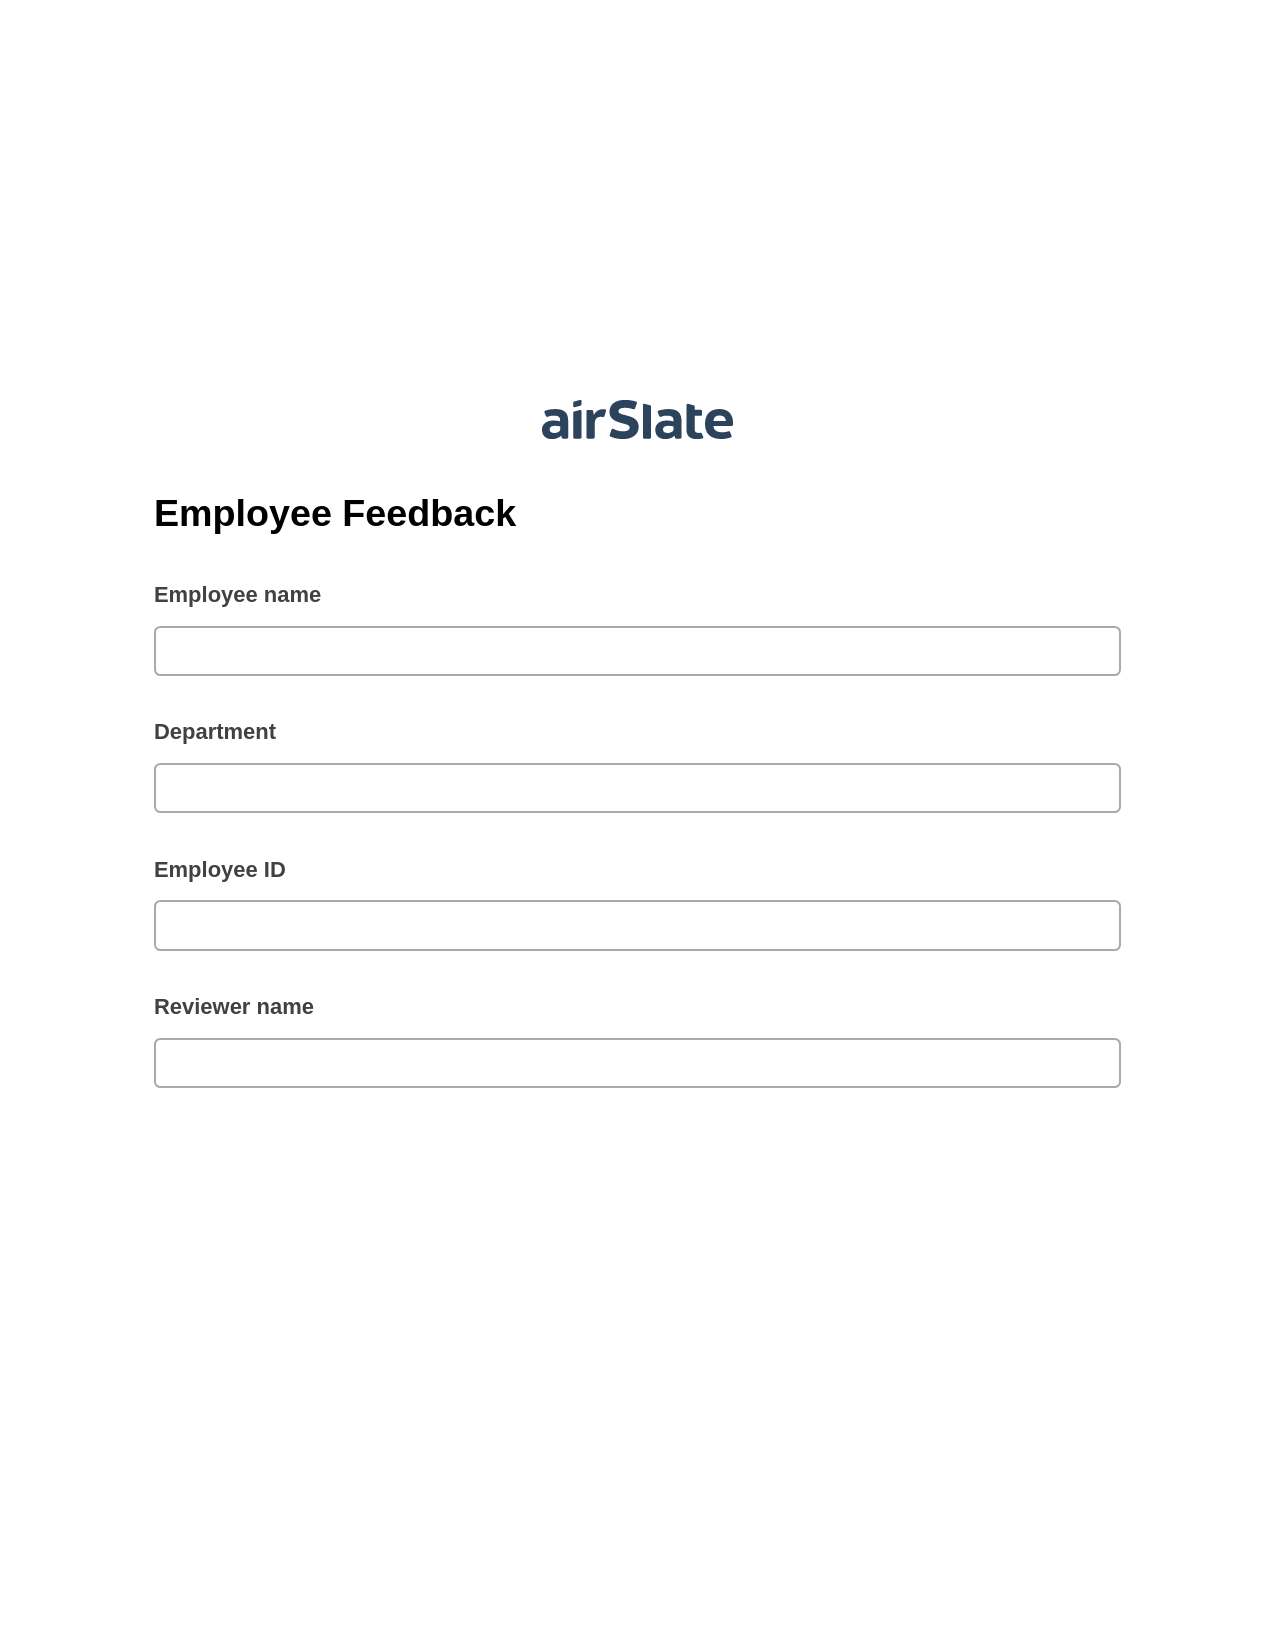 Multirole Employee Feedback Pre-fill from Salesforce Records with SOQL Bot, Reminder Bot, Box Bot